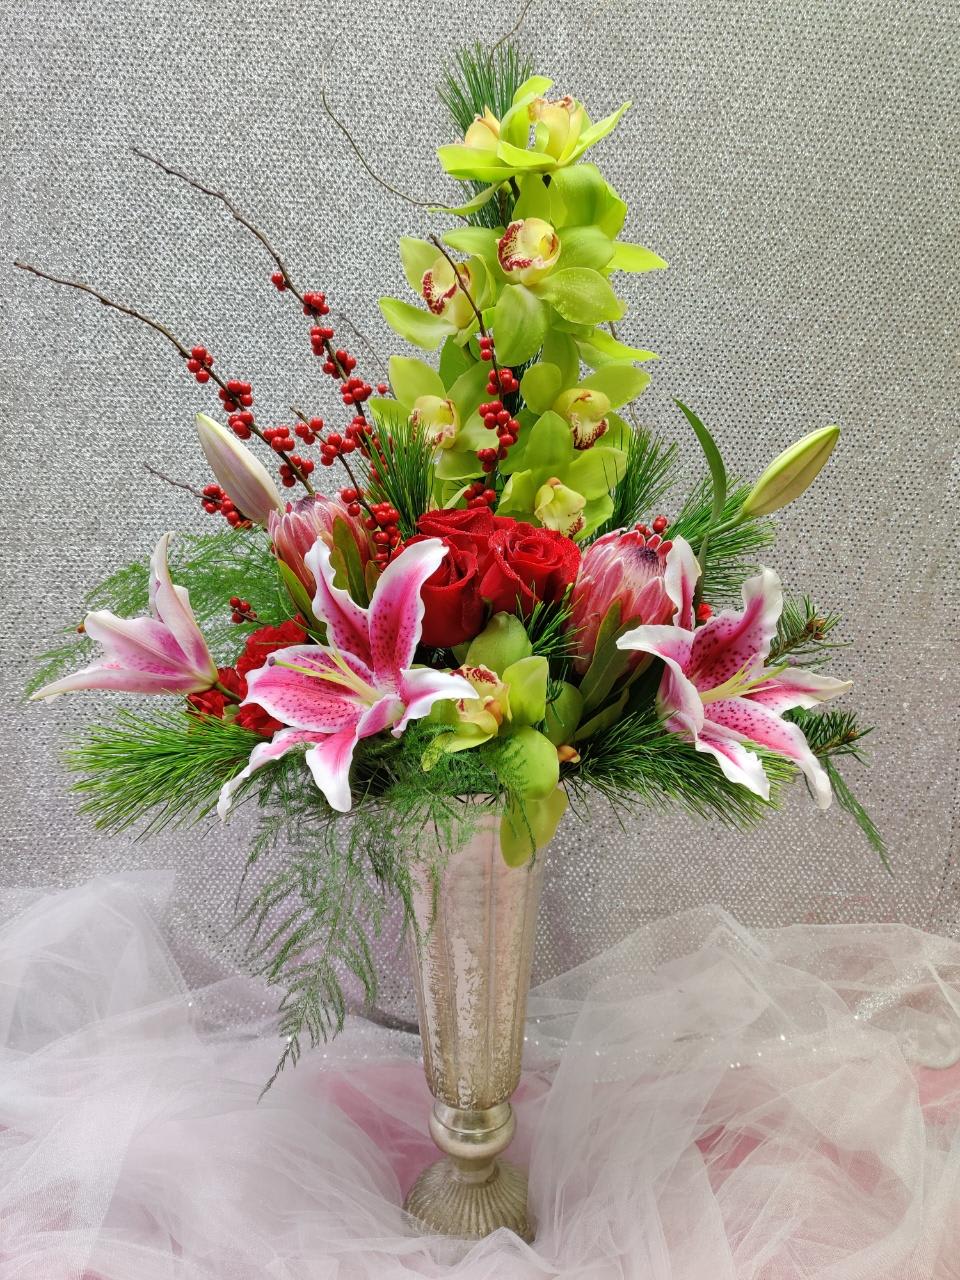 This beautiful handcrafted holiday arrangement is perfect to warm a cold winter